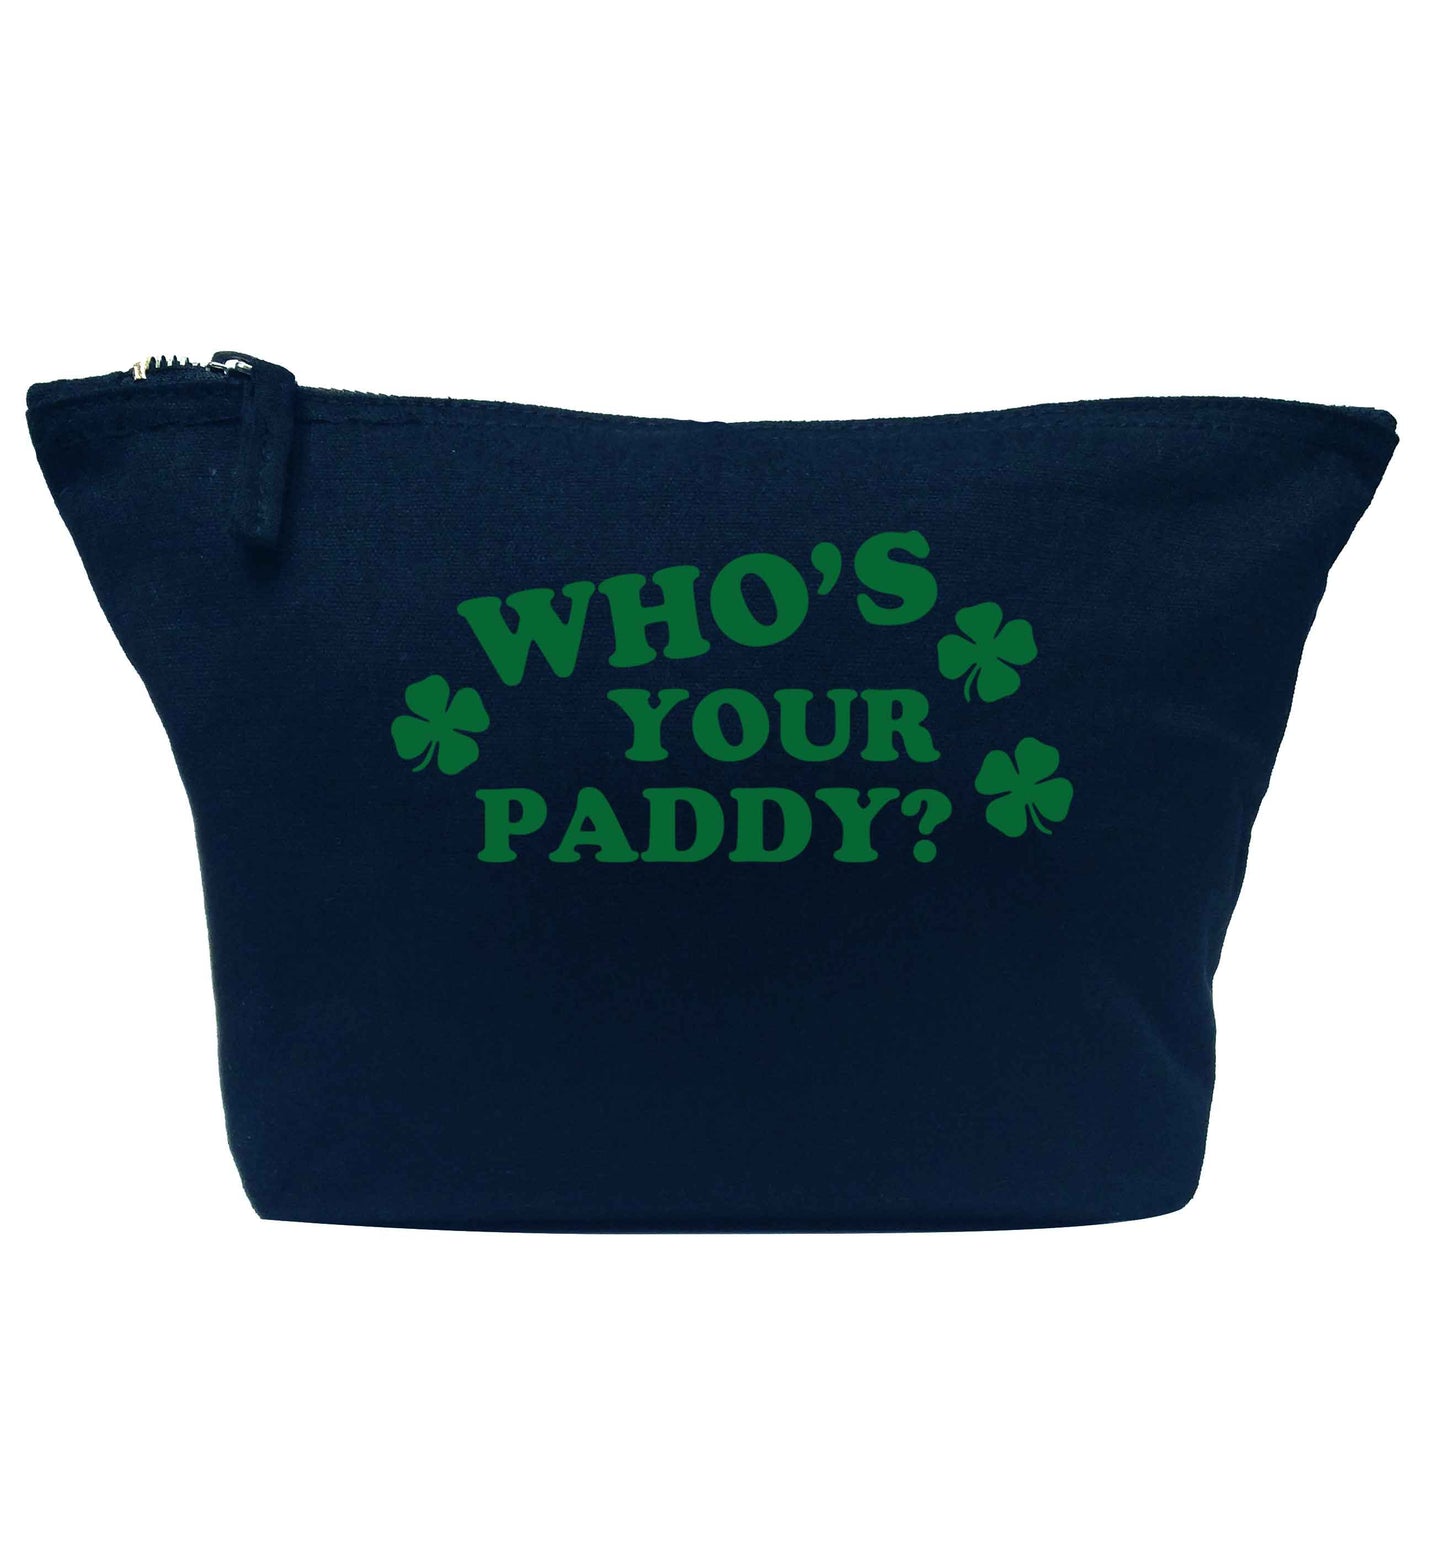 Who's your paddy? navy makeup bag